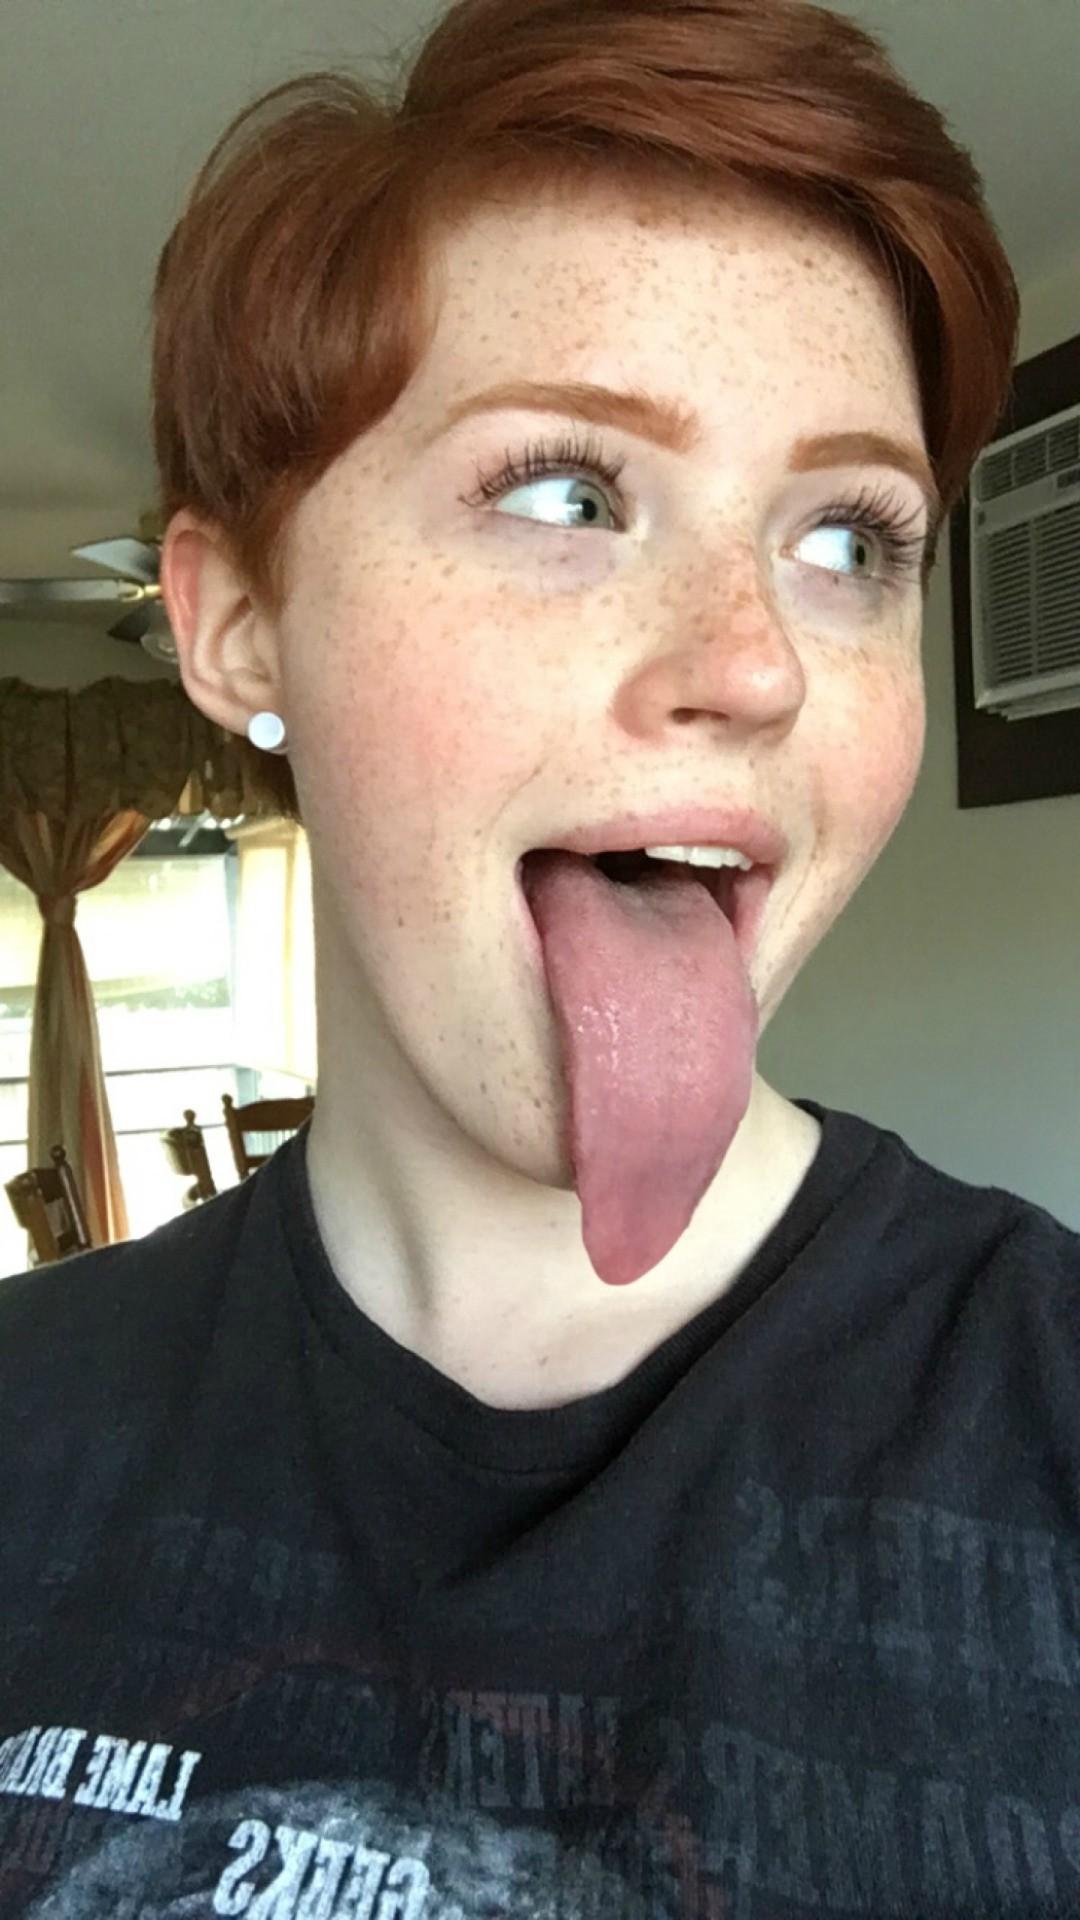 Girls with longest tongue